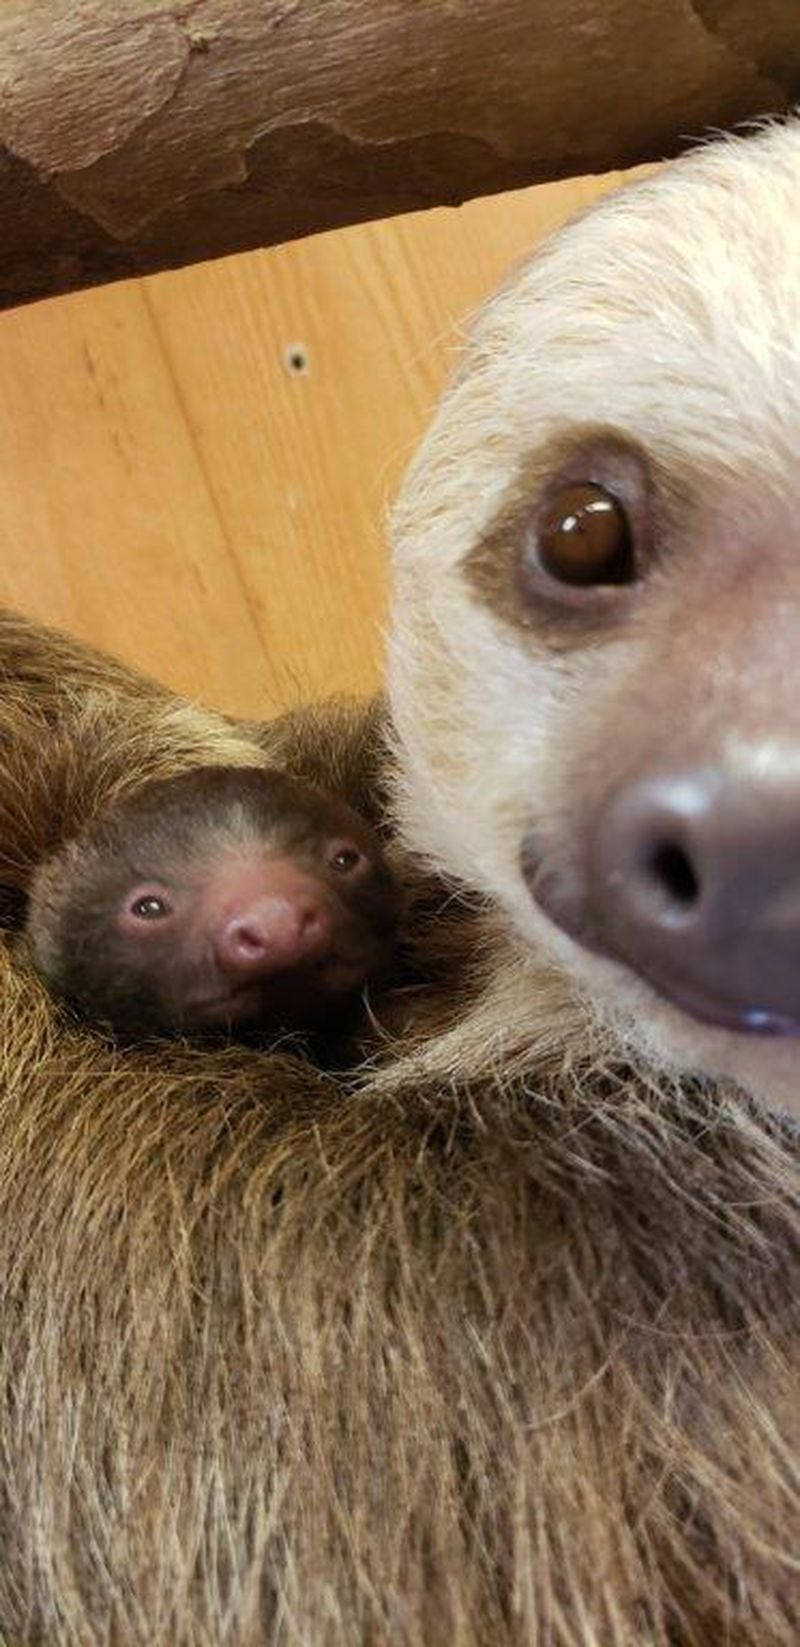 The new baby sloth at Zoo Atlanta will spend most of its time with mother Bonnie. CONTRIBUTED: PATTI FRAZIER